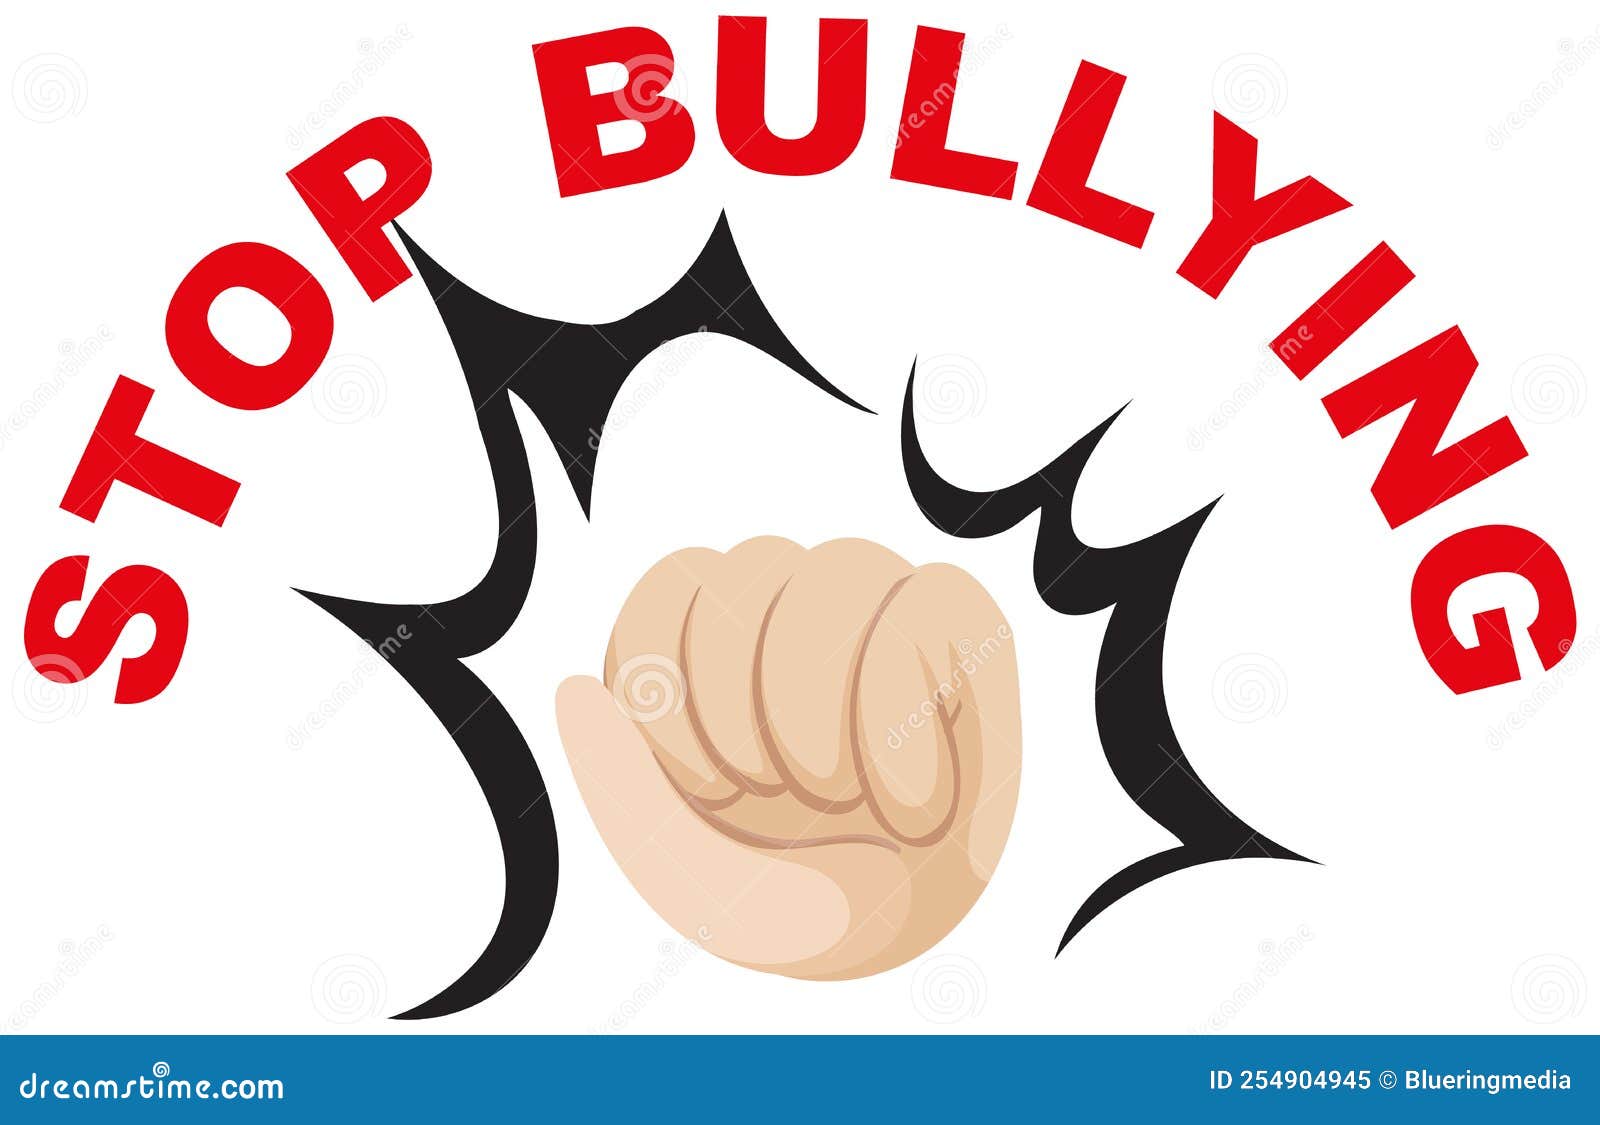 Stop Bullying Banner Concept Vector Stock Vector - Illustration of ...